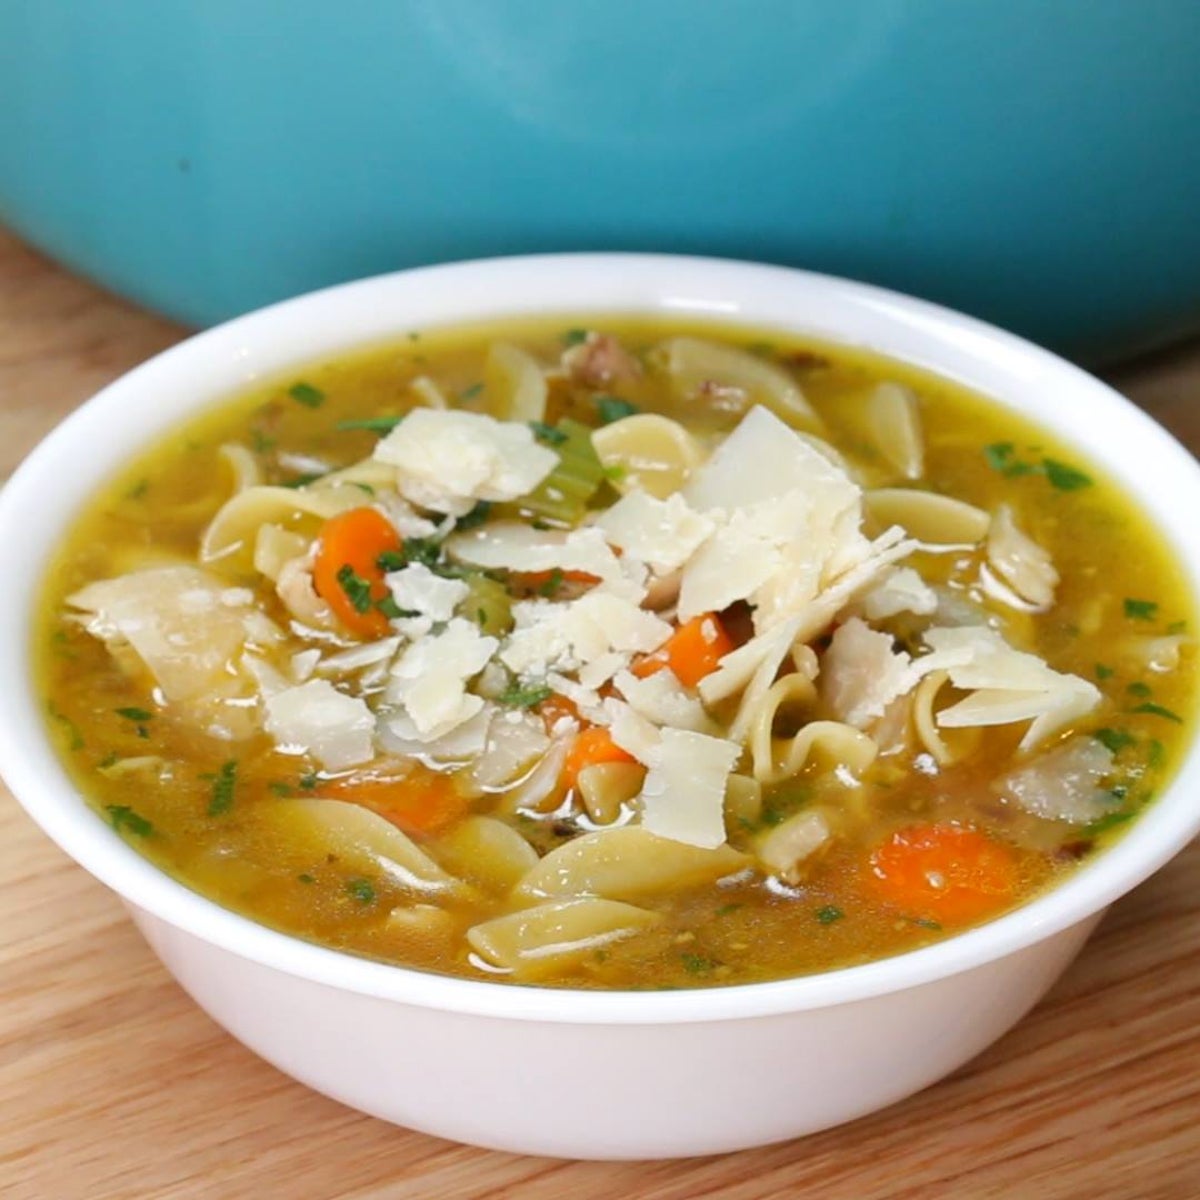 Homemade Chicken Noodle Soup Recipe and VIDEO